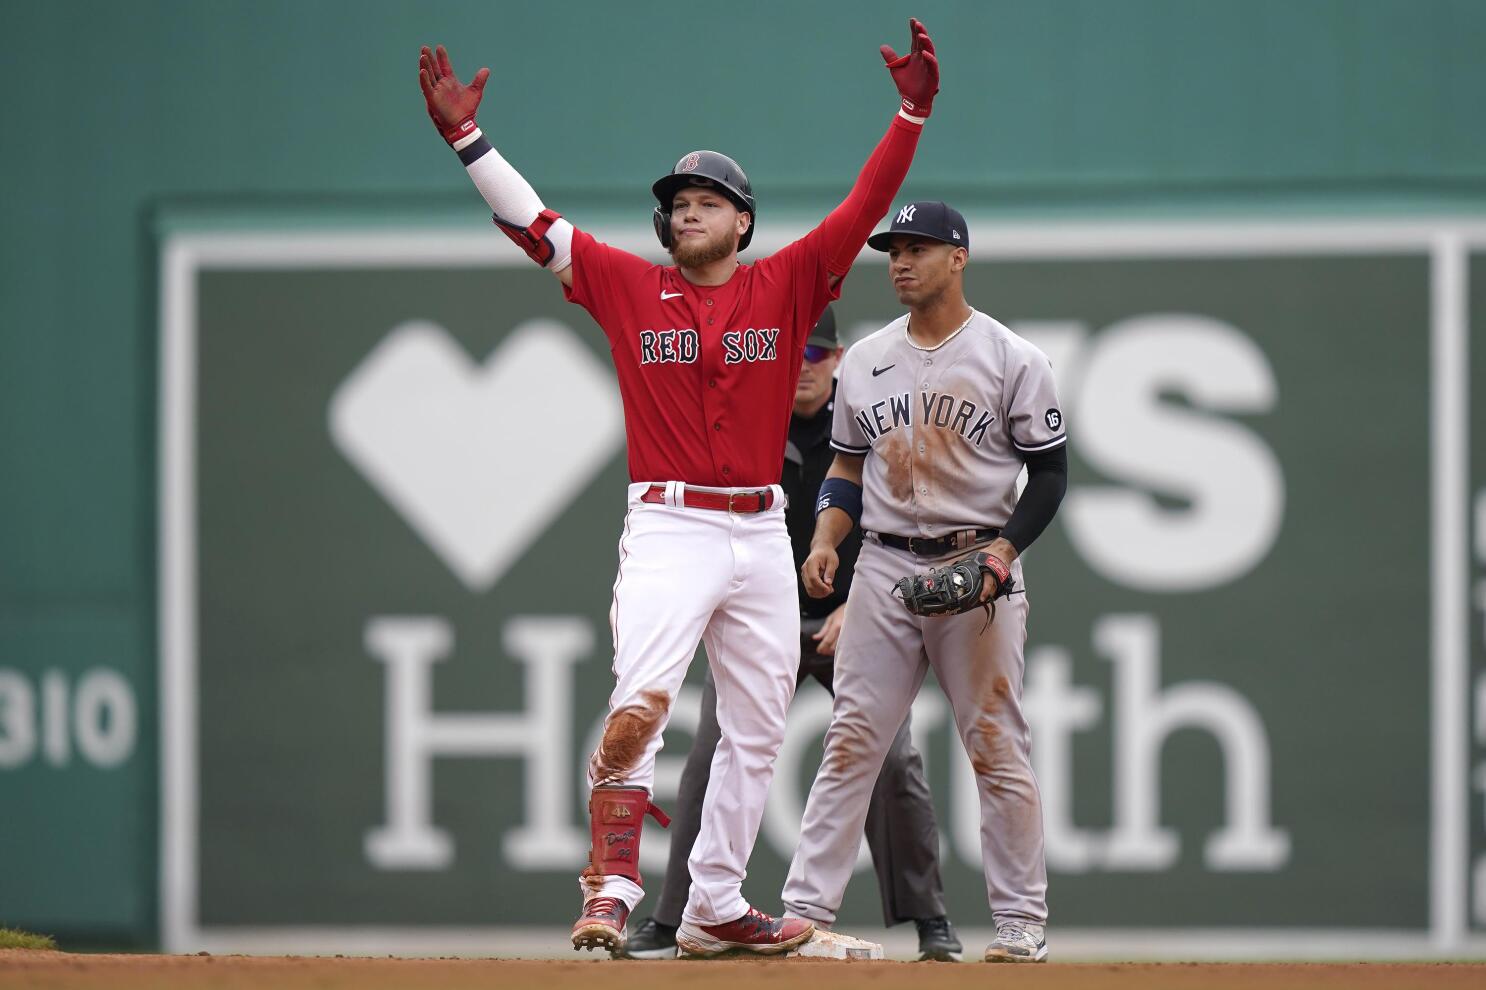 Red Sox rally for win over Rockies with 5-run seventh